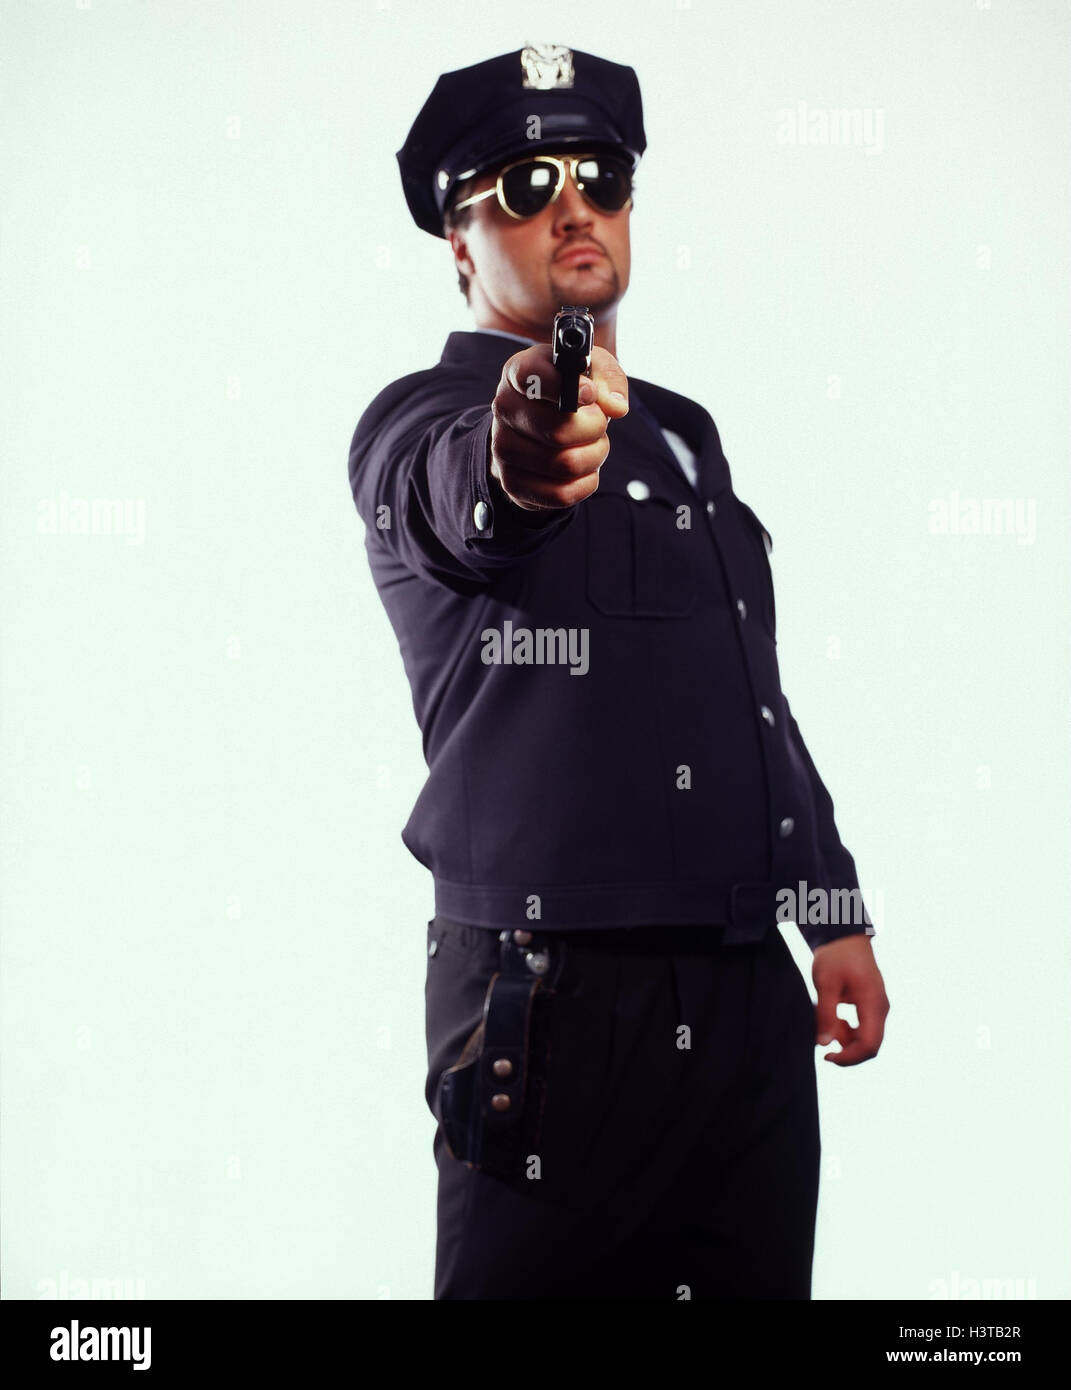 Policeman, sunglasses, gun, aim, studio, cut out, occupation, police, arms, security staff, marking, watch, police force, fight against crime, uniform, uniformed, entry, police entry, Stock Photo